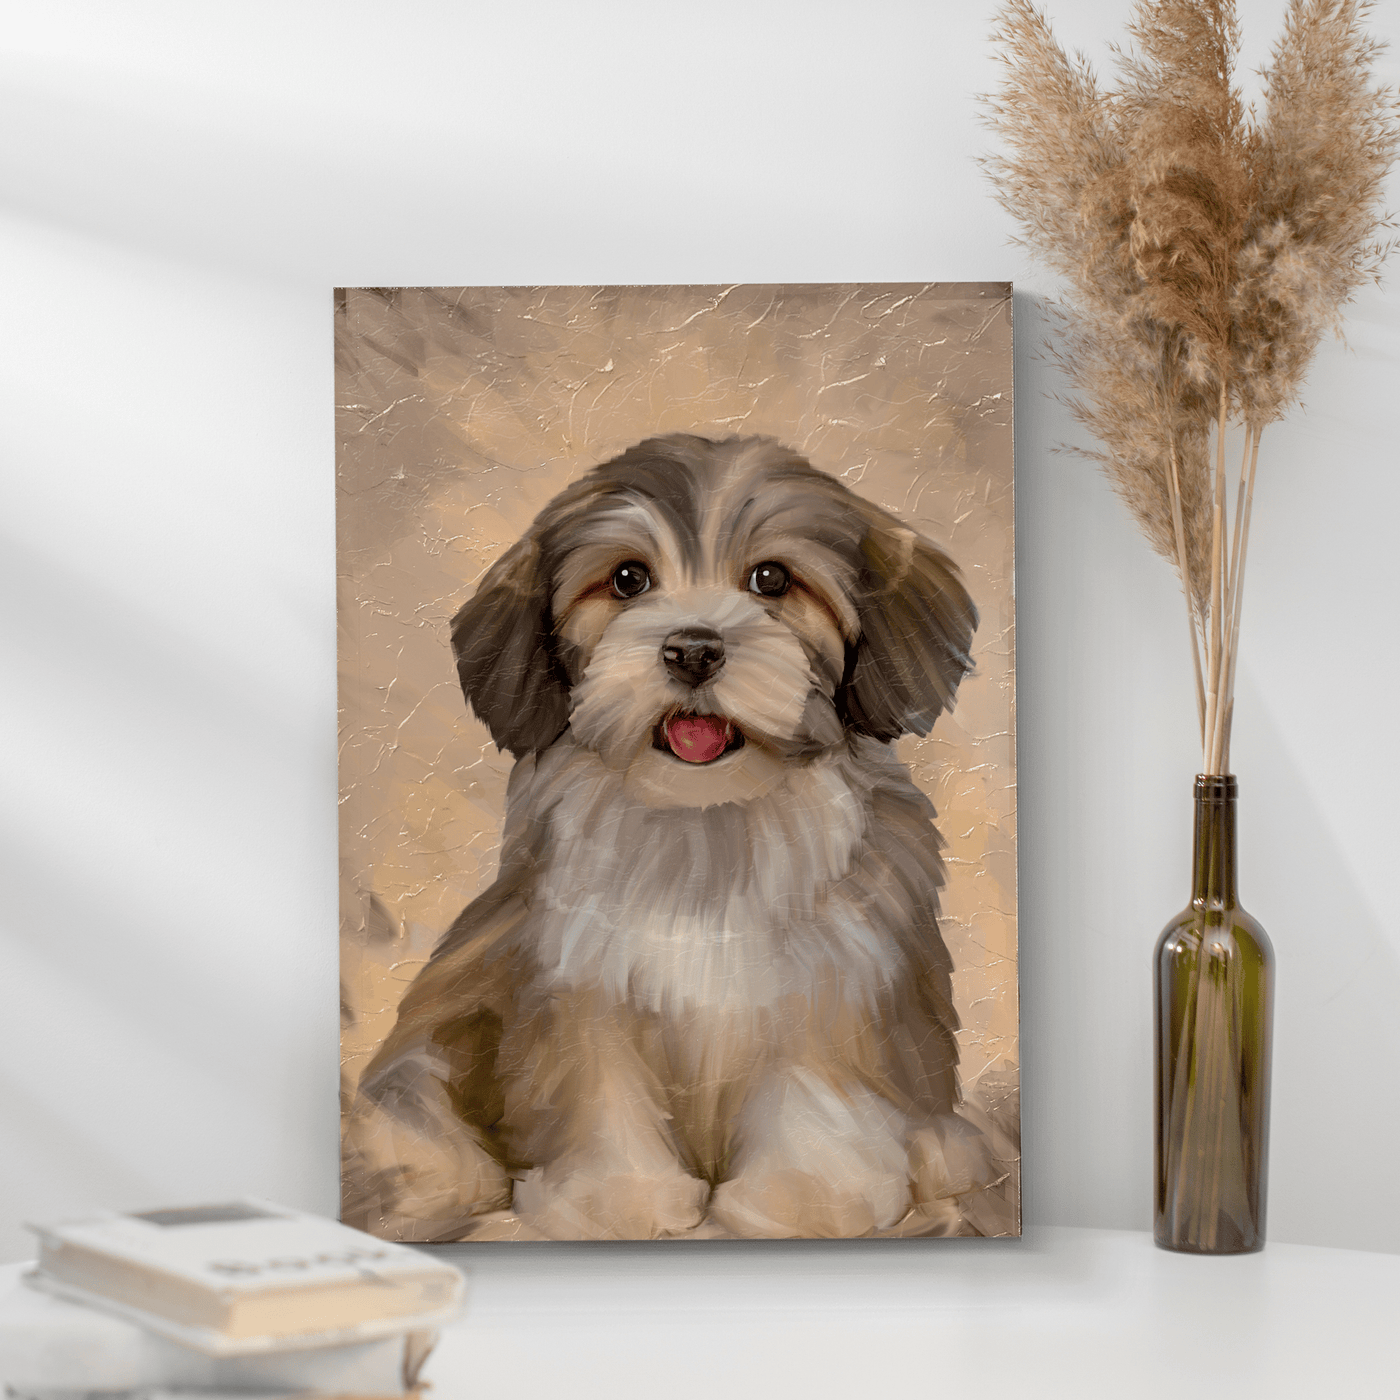 pastel pet portraits of an adorable furry puppy